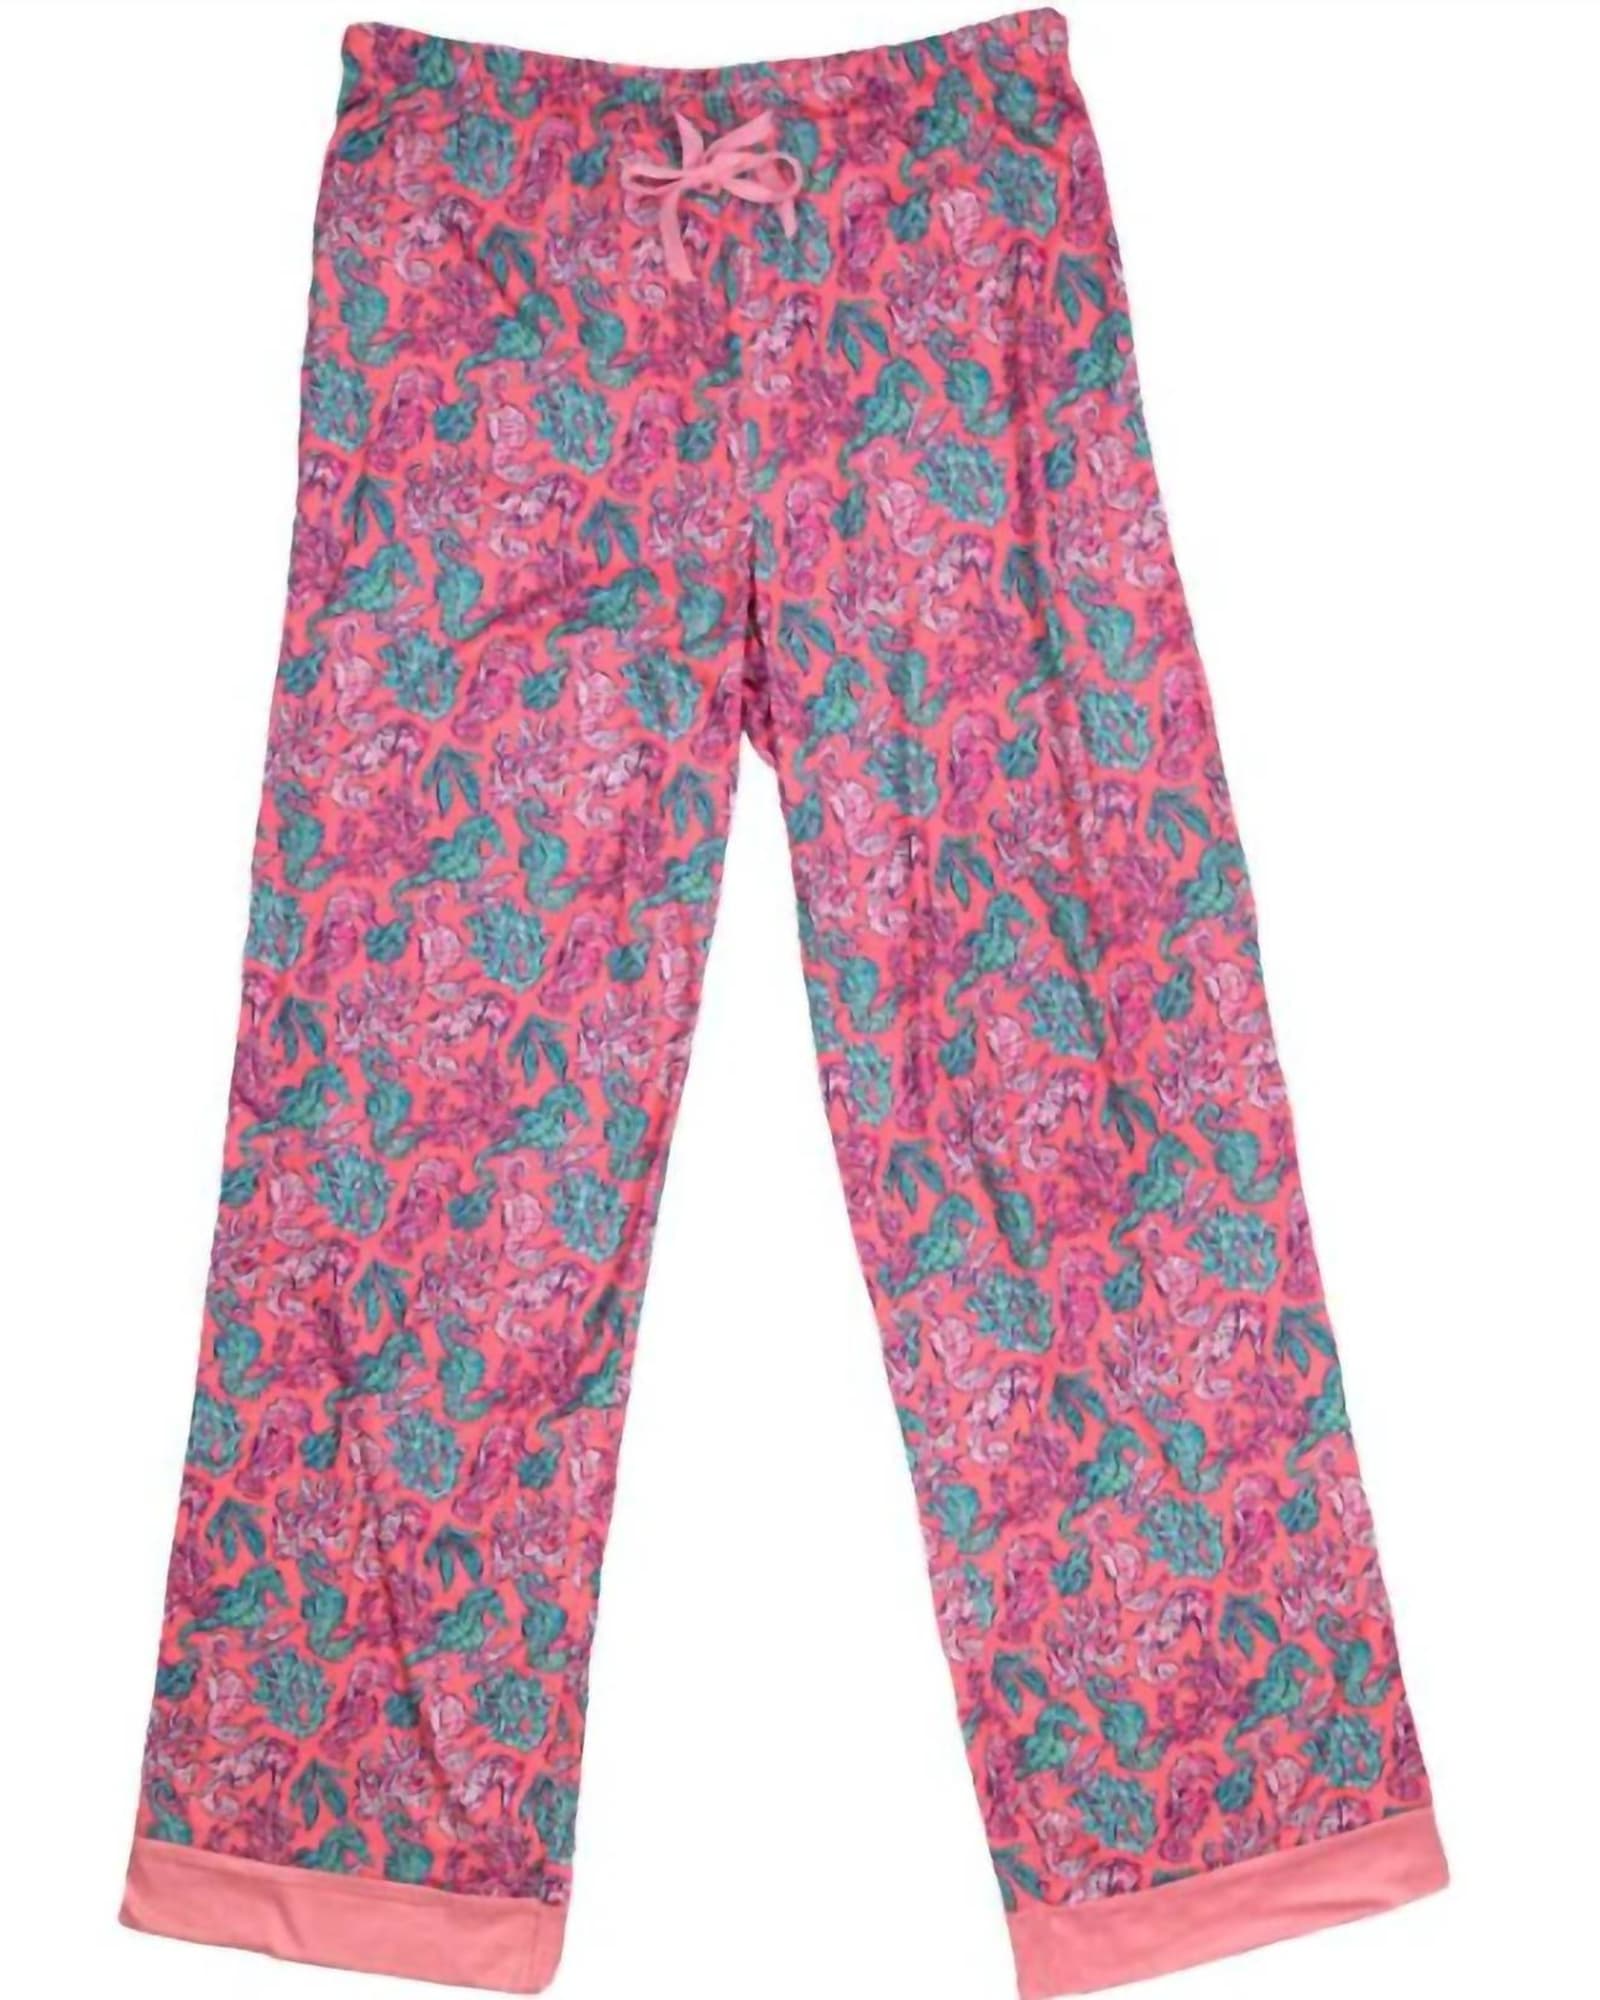 Lounge Pants in Seahorse | Seahorse